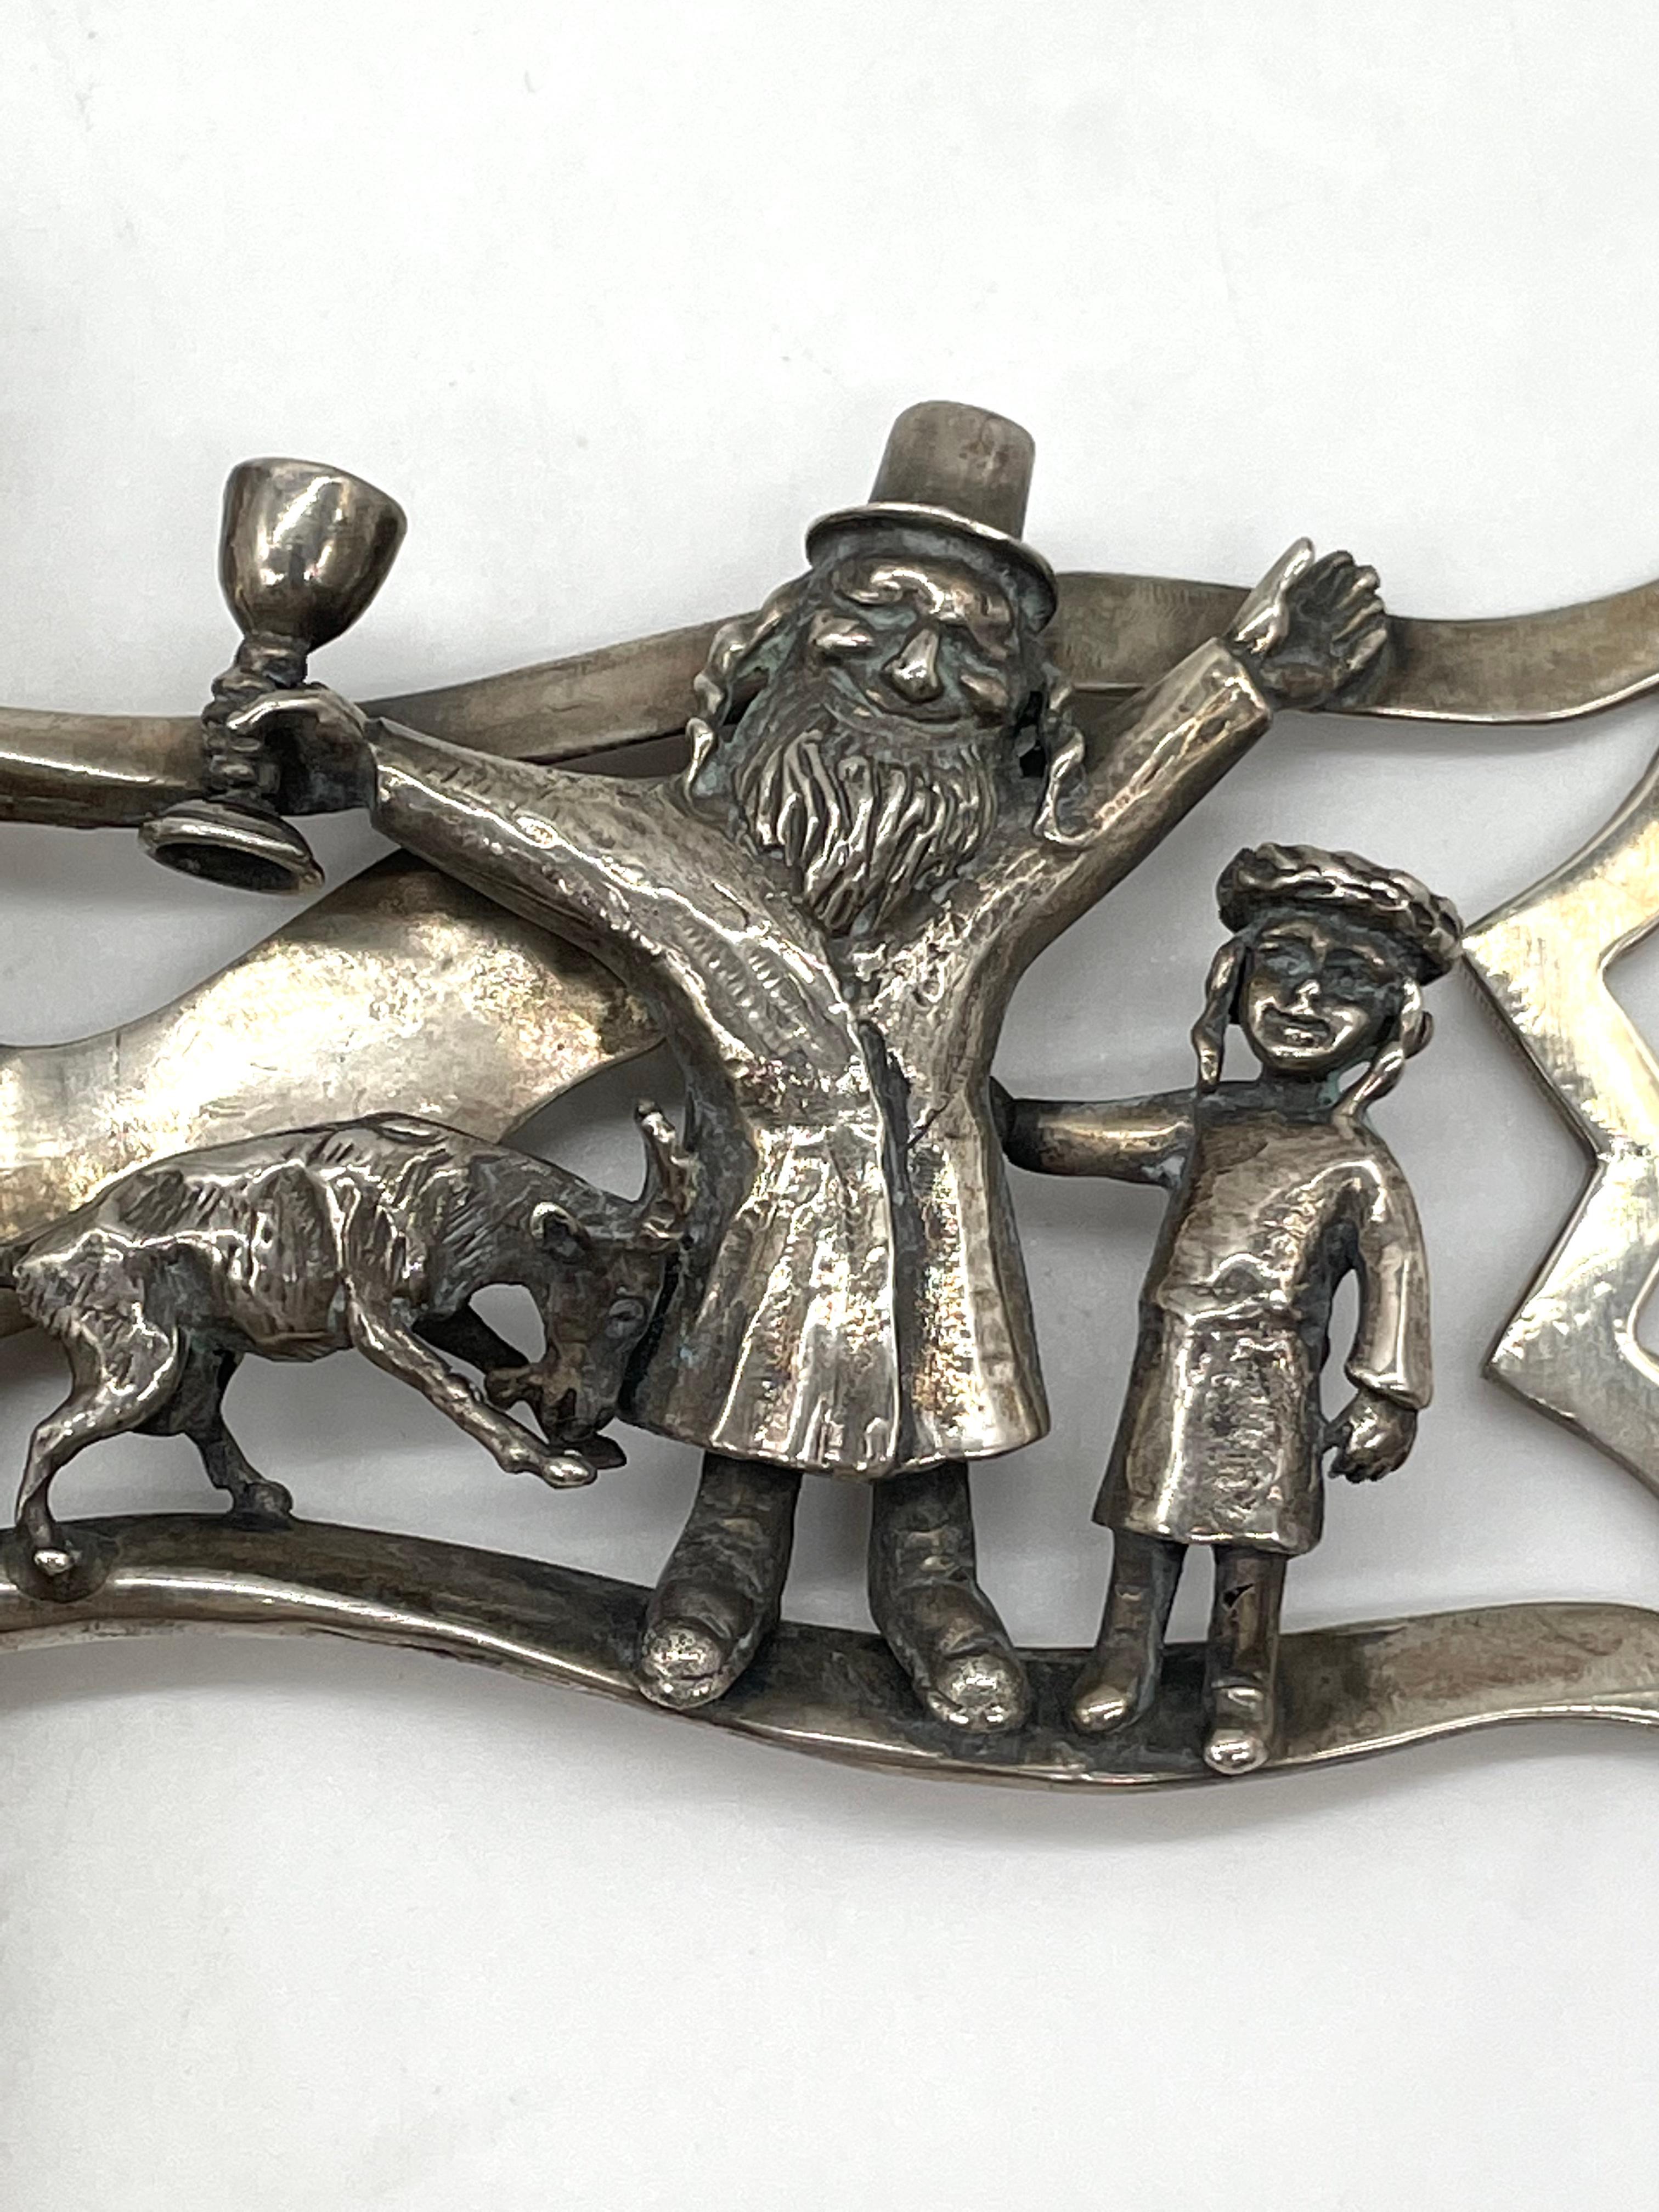 Mid-20th century silver grogger made by Peter Ehrenthal. Corresponding to the joyful spirit of the Jewish holiday of Purim, this grogger depicts a whimsical scene. At the center, three figures are joined in festive mood: a rabbi raising his hands in